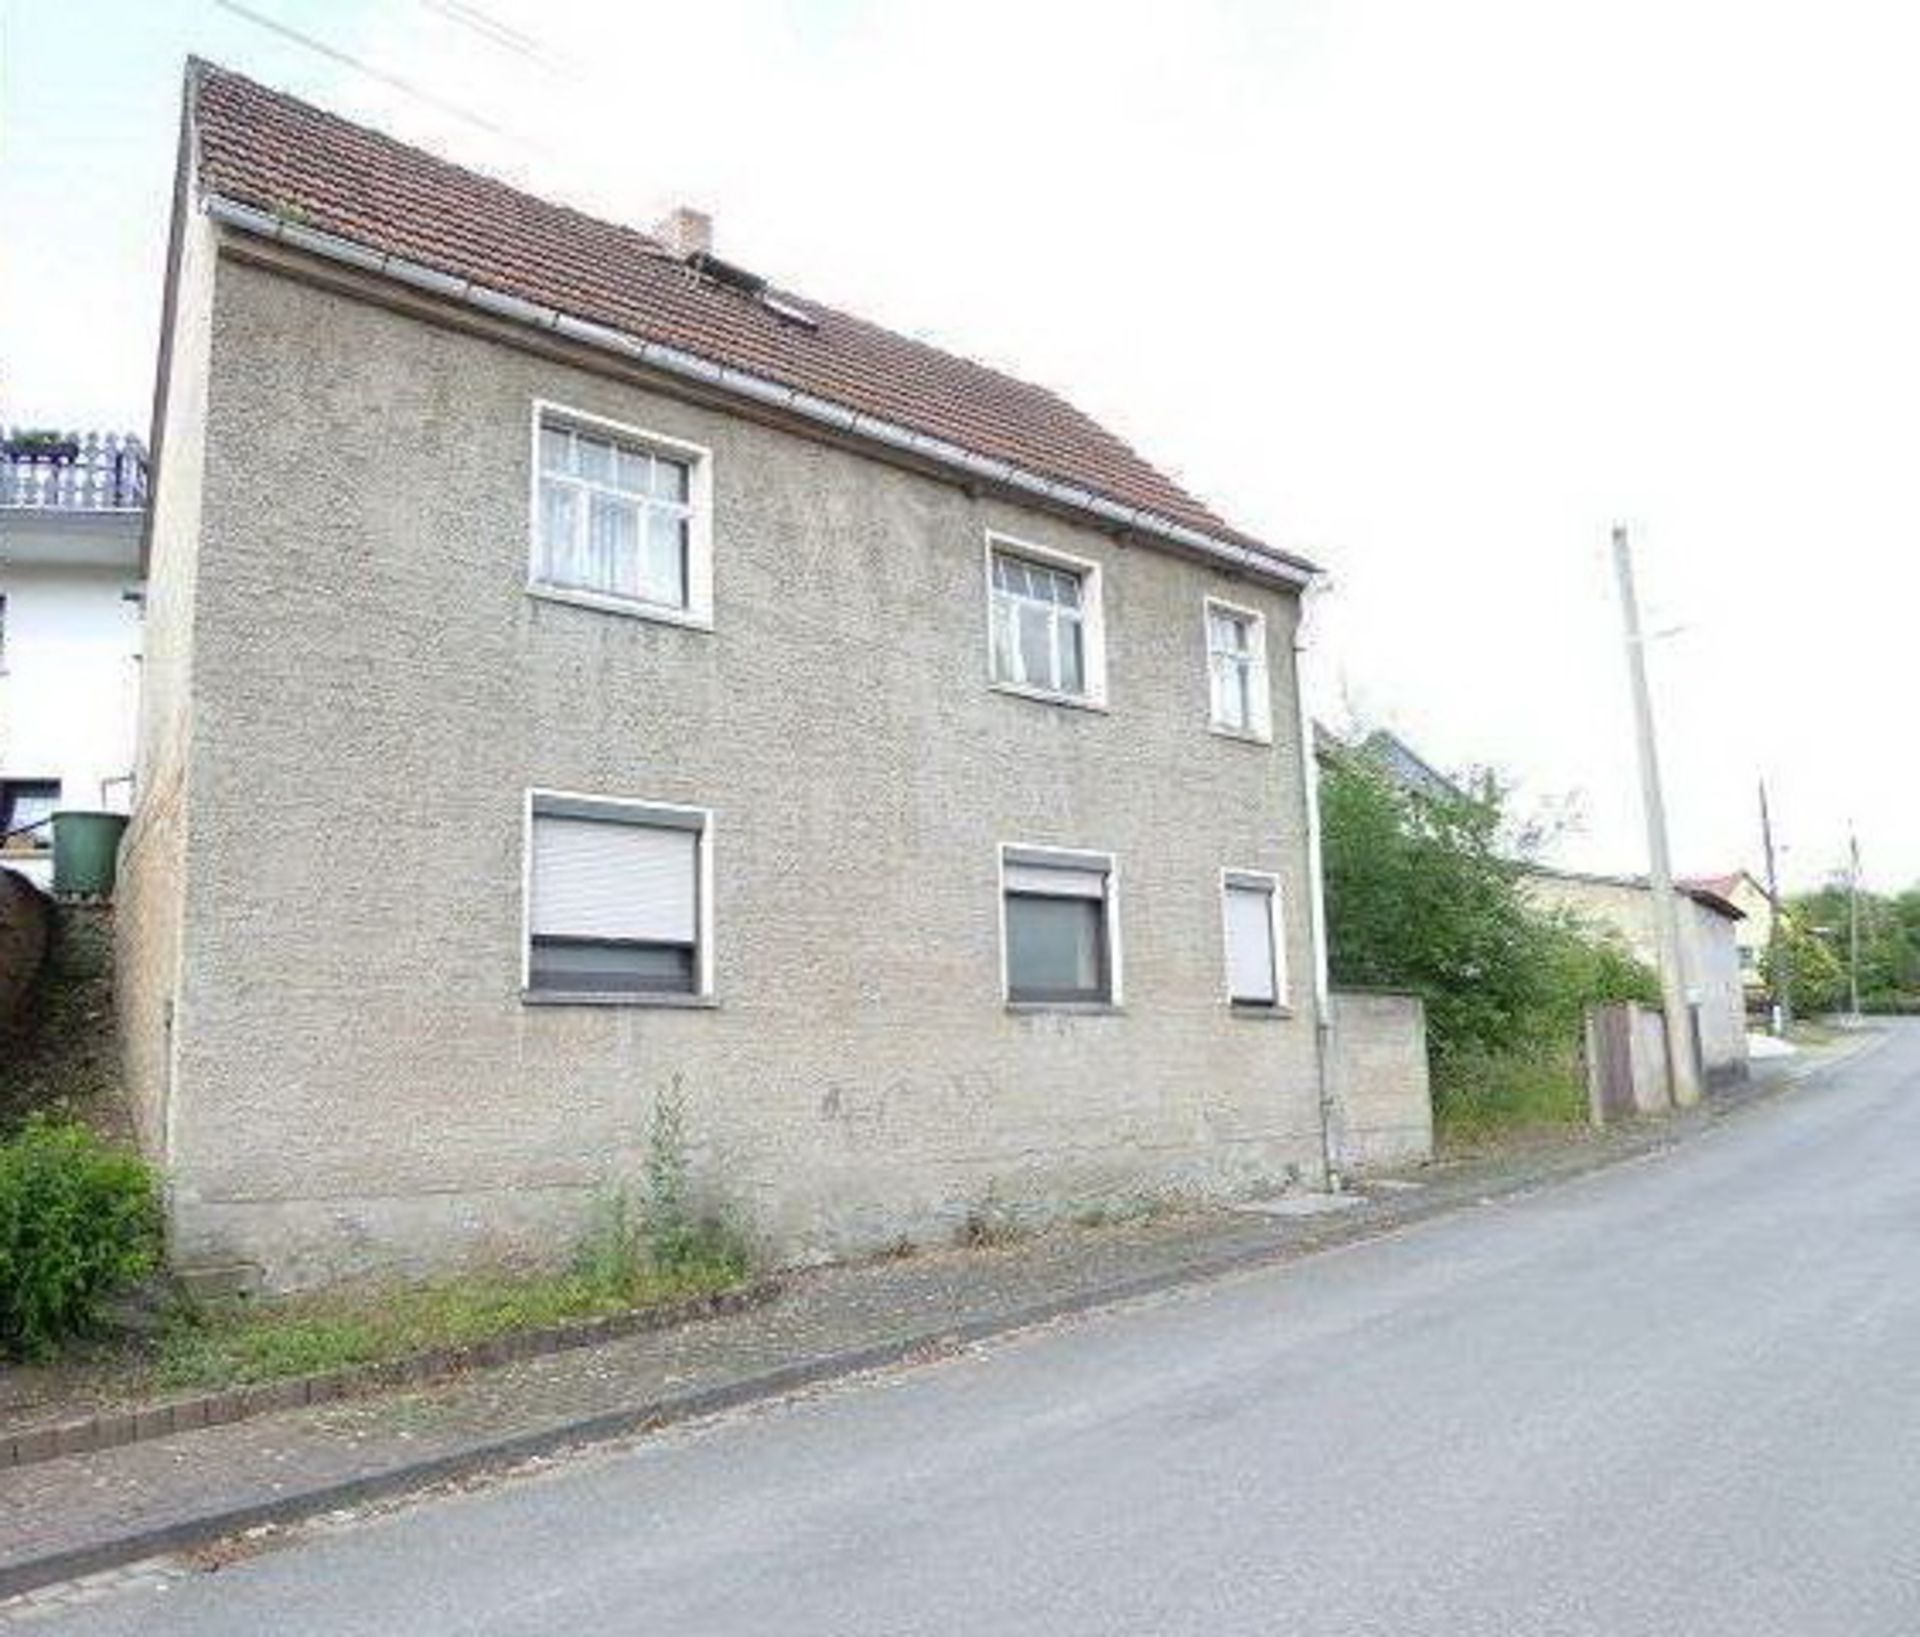 Two Storey Family Home in Sudharz, Germany only 10% BUYER'S PREMIUM TODAY